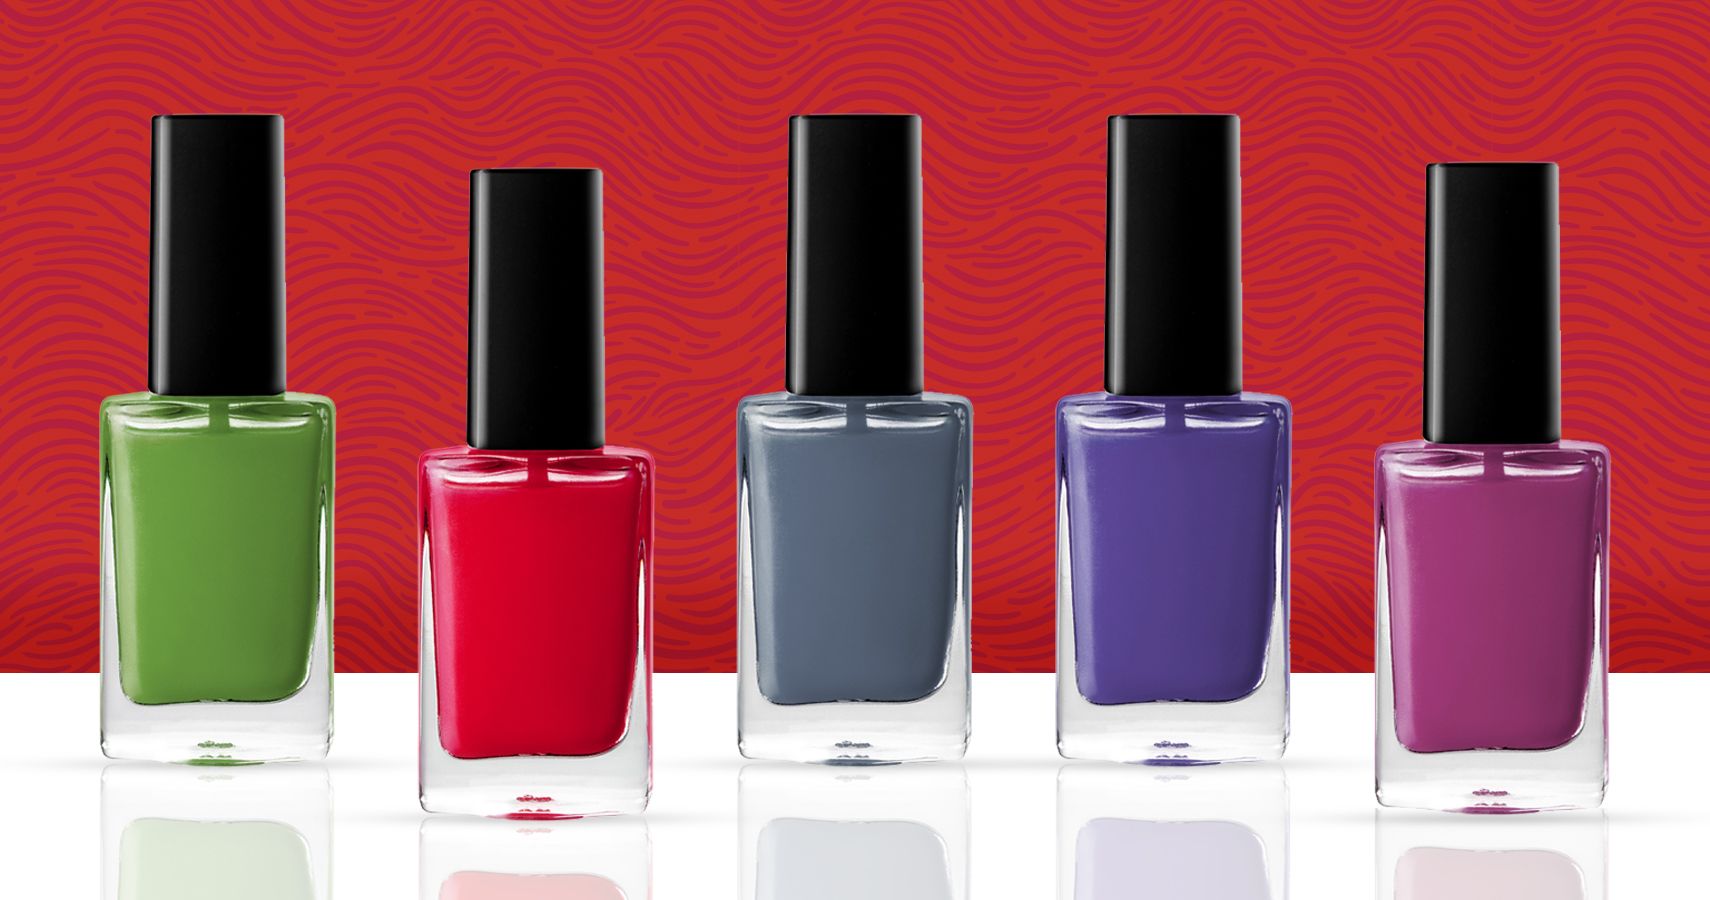 3. "Trendy Fall Nail Colors and Designs to Try This Season" - wide 3